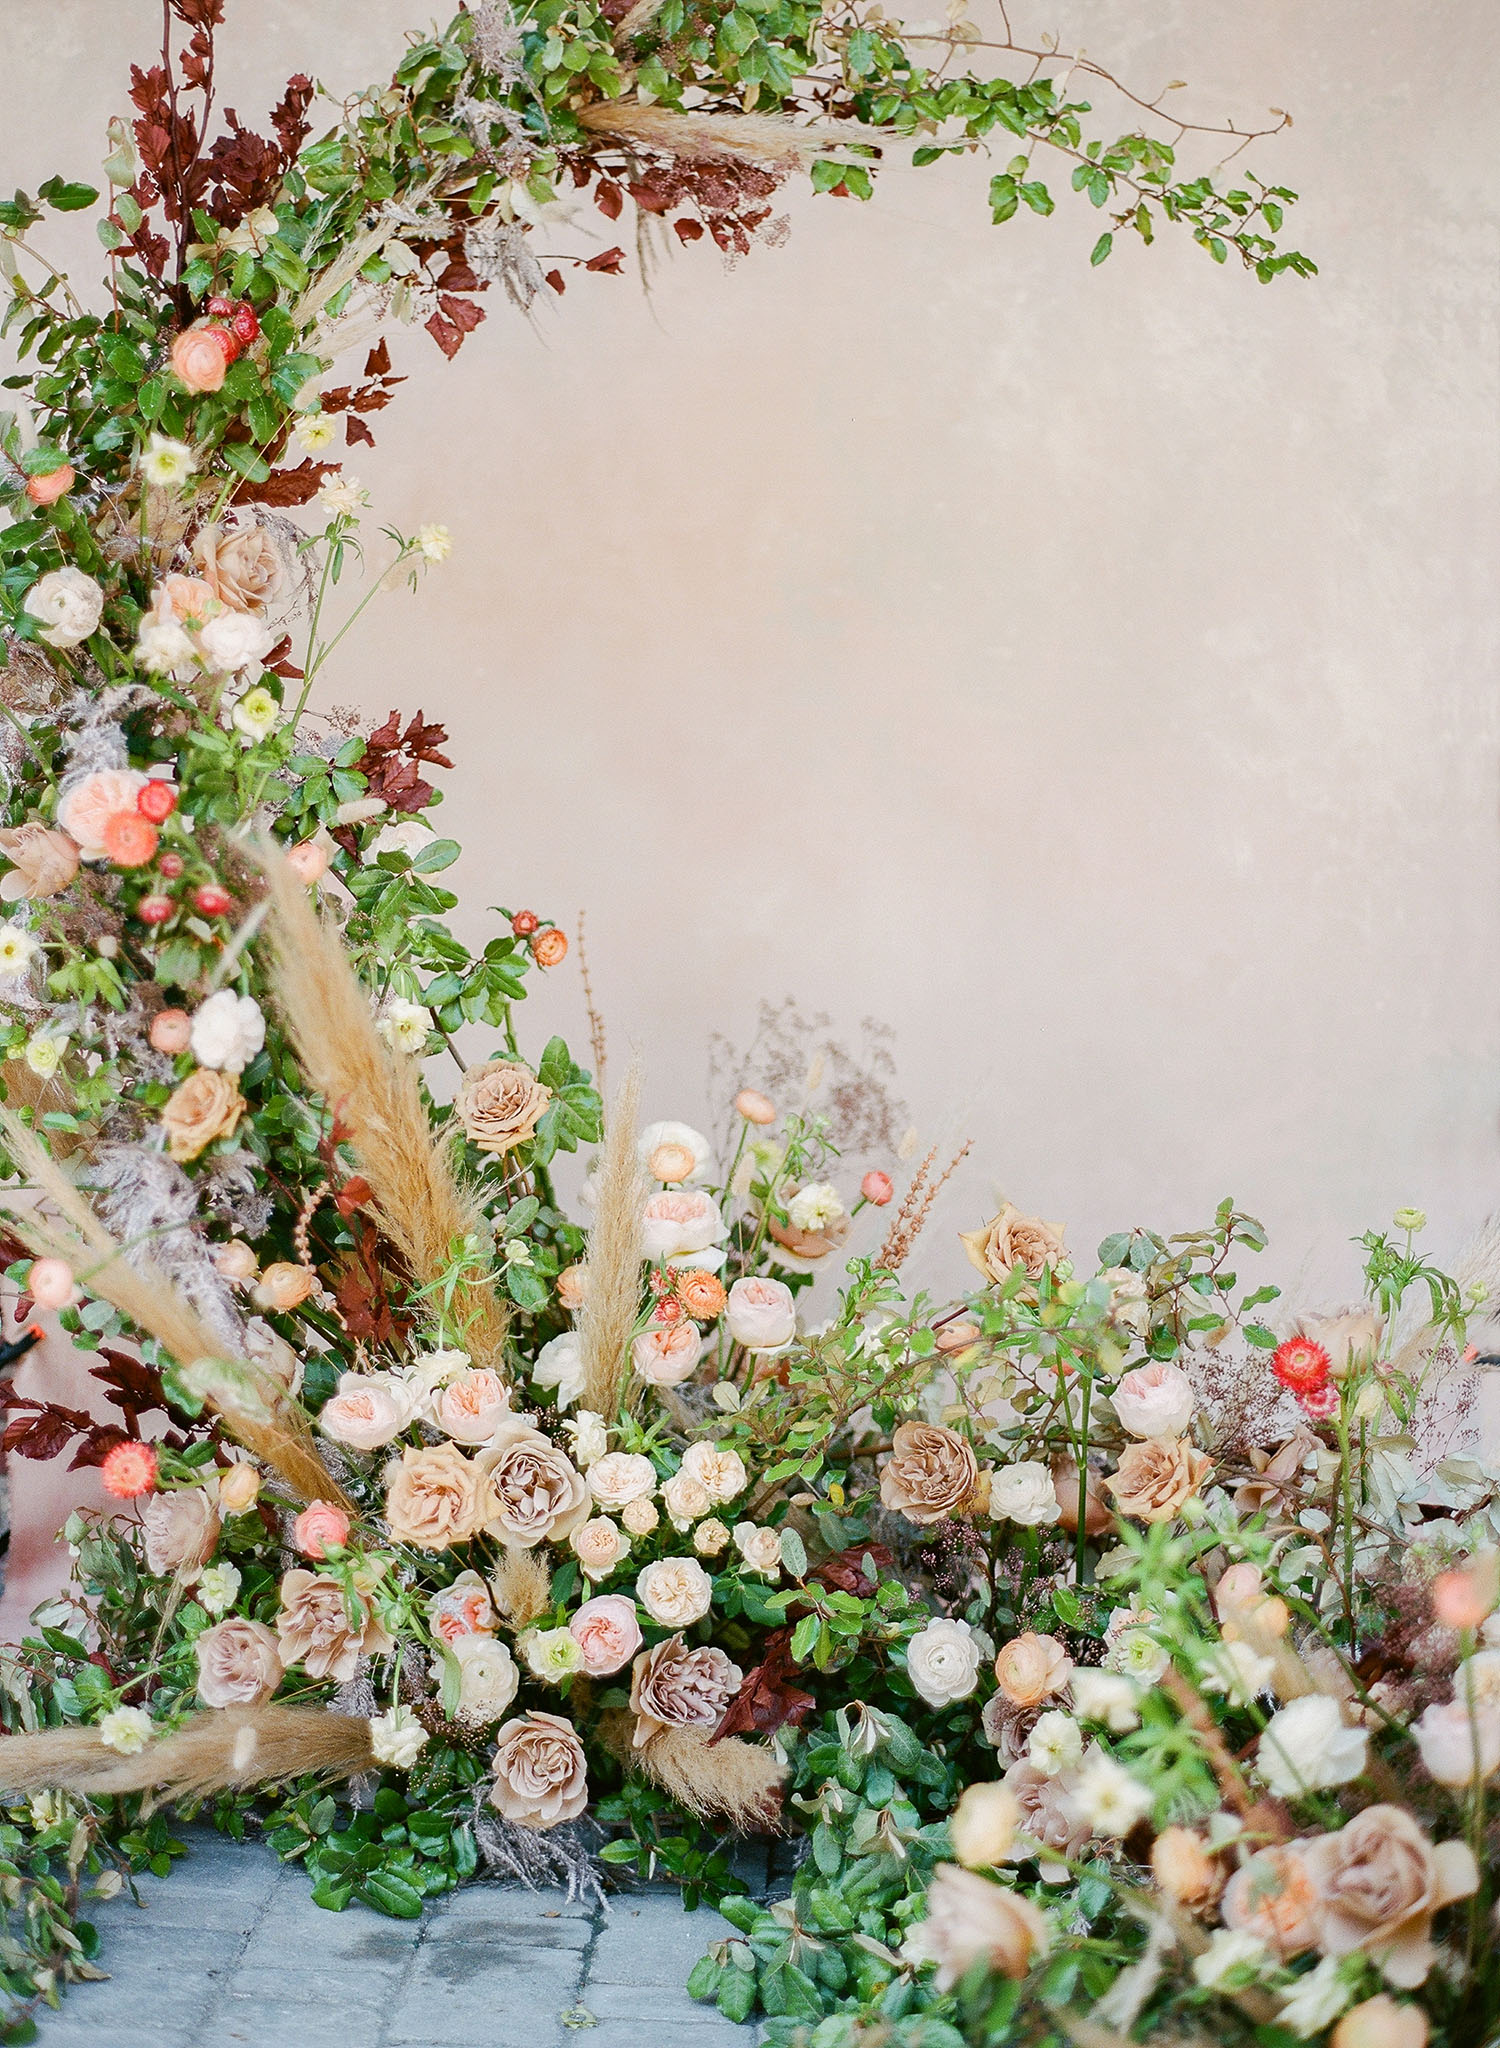 Overgrown floral crescent wedding backdrop from Festoon Charleston with planning and design by Willow & Oak Events and photography by Clay Austin